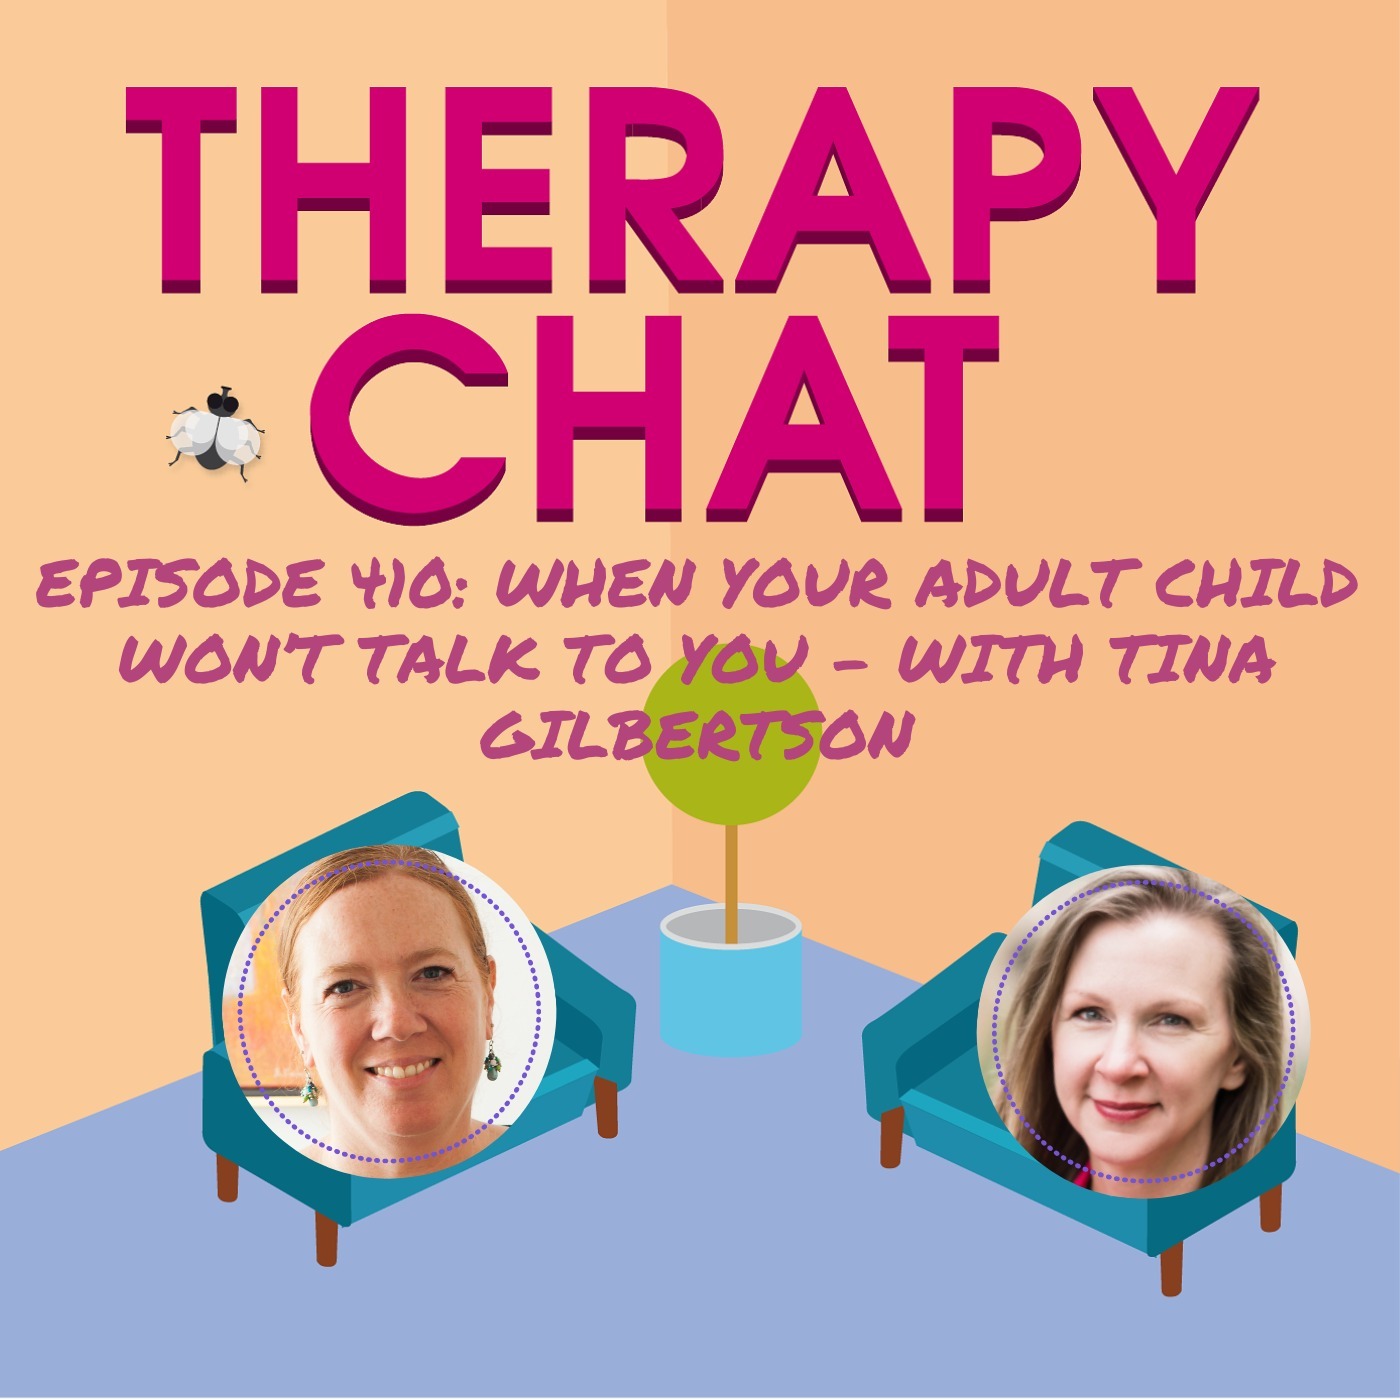 410: When Your Adult Child Won’t Talk To You - With Tina Gilbertson